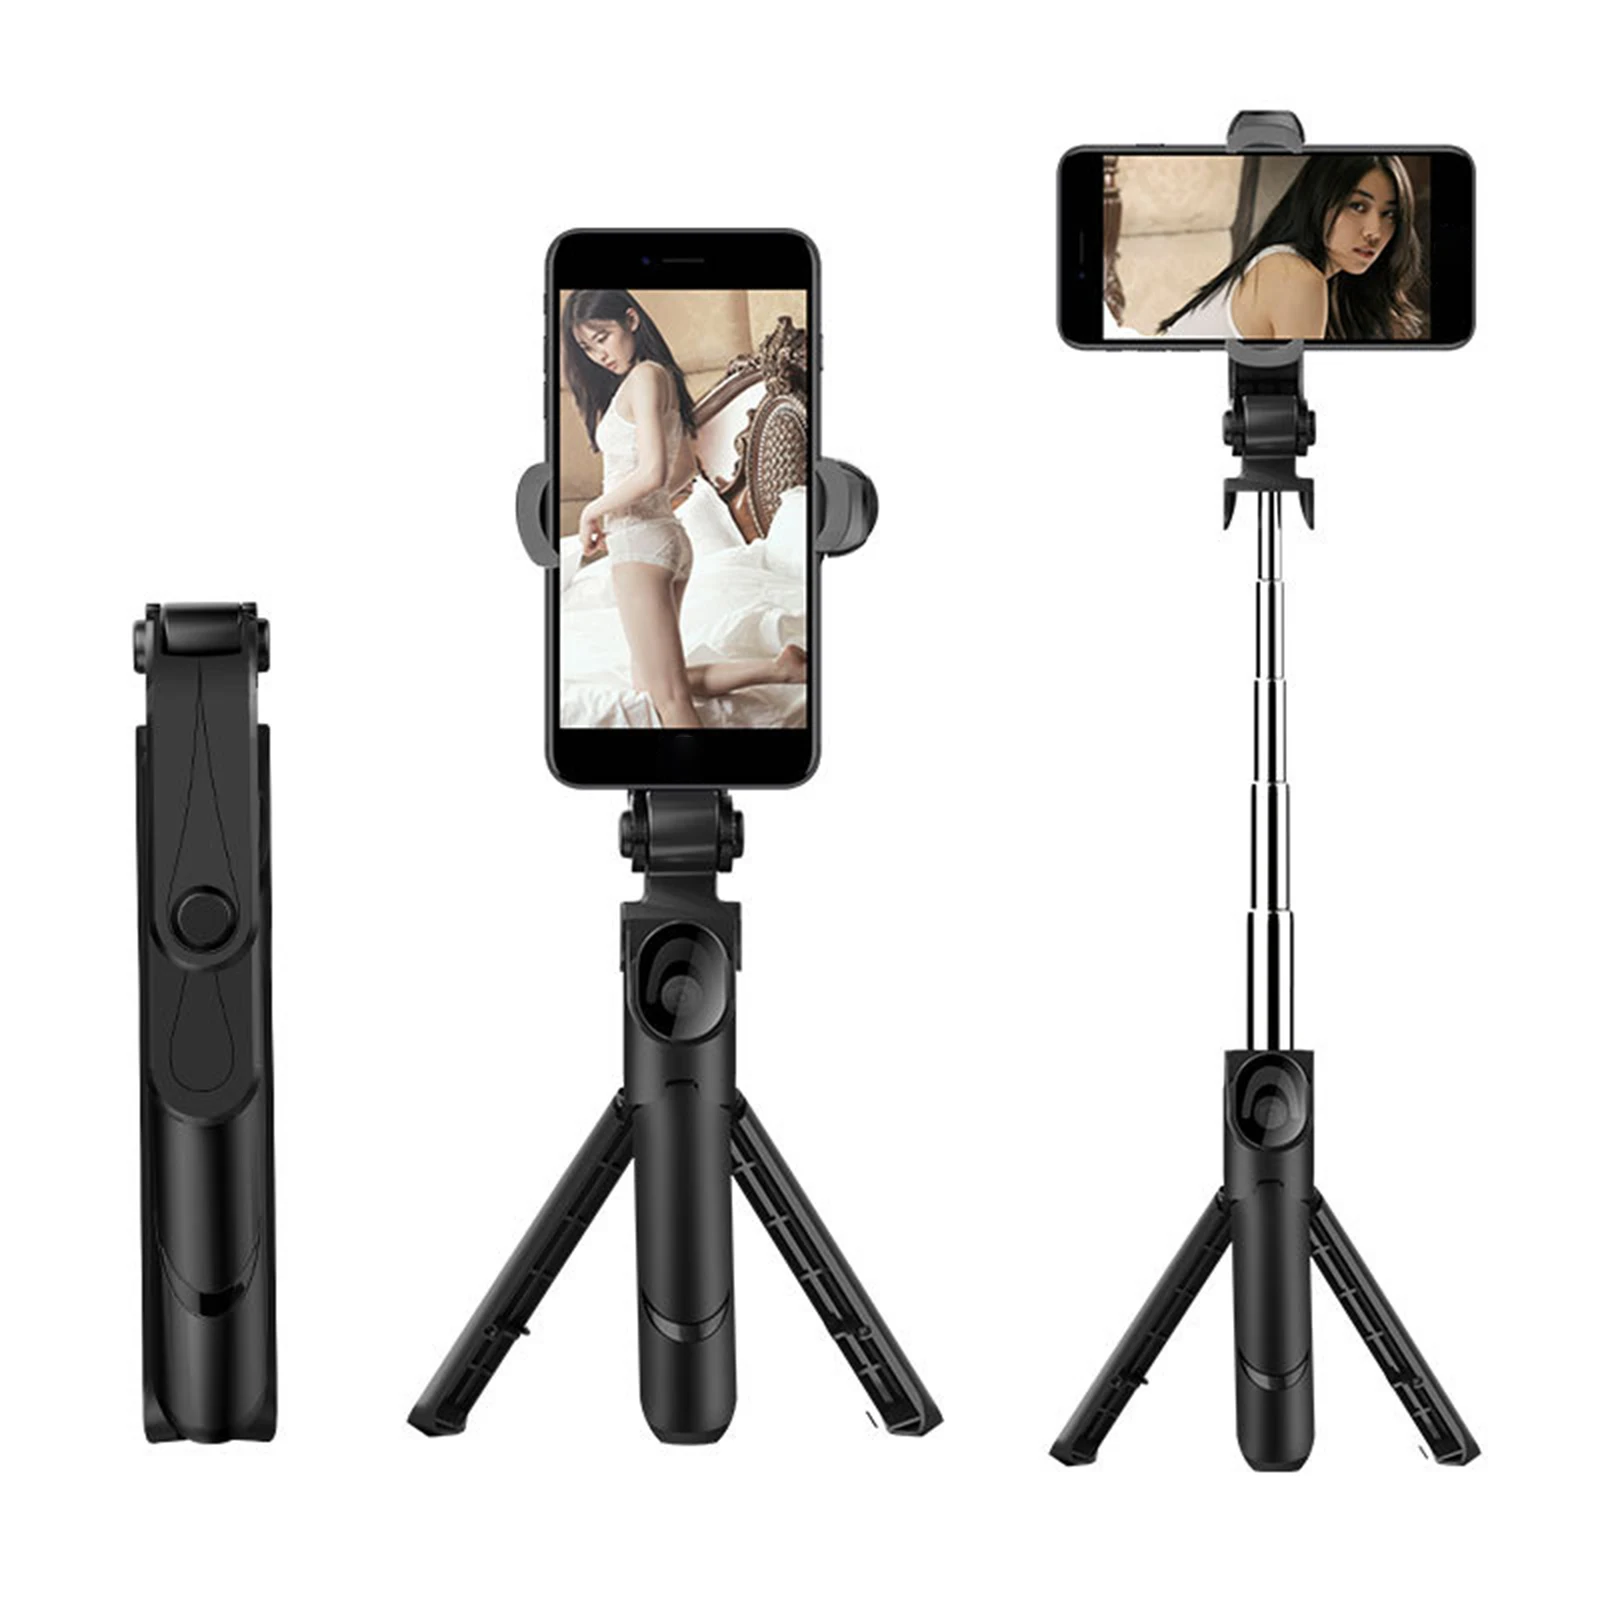 Selfie Stick Phone Tripod Extendable Monopod With Bluetooth Remote 3 In 1 Phone Tripod For Smartphone Selfie Stick enlarge